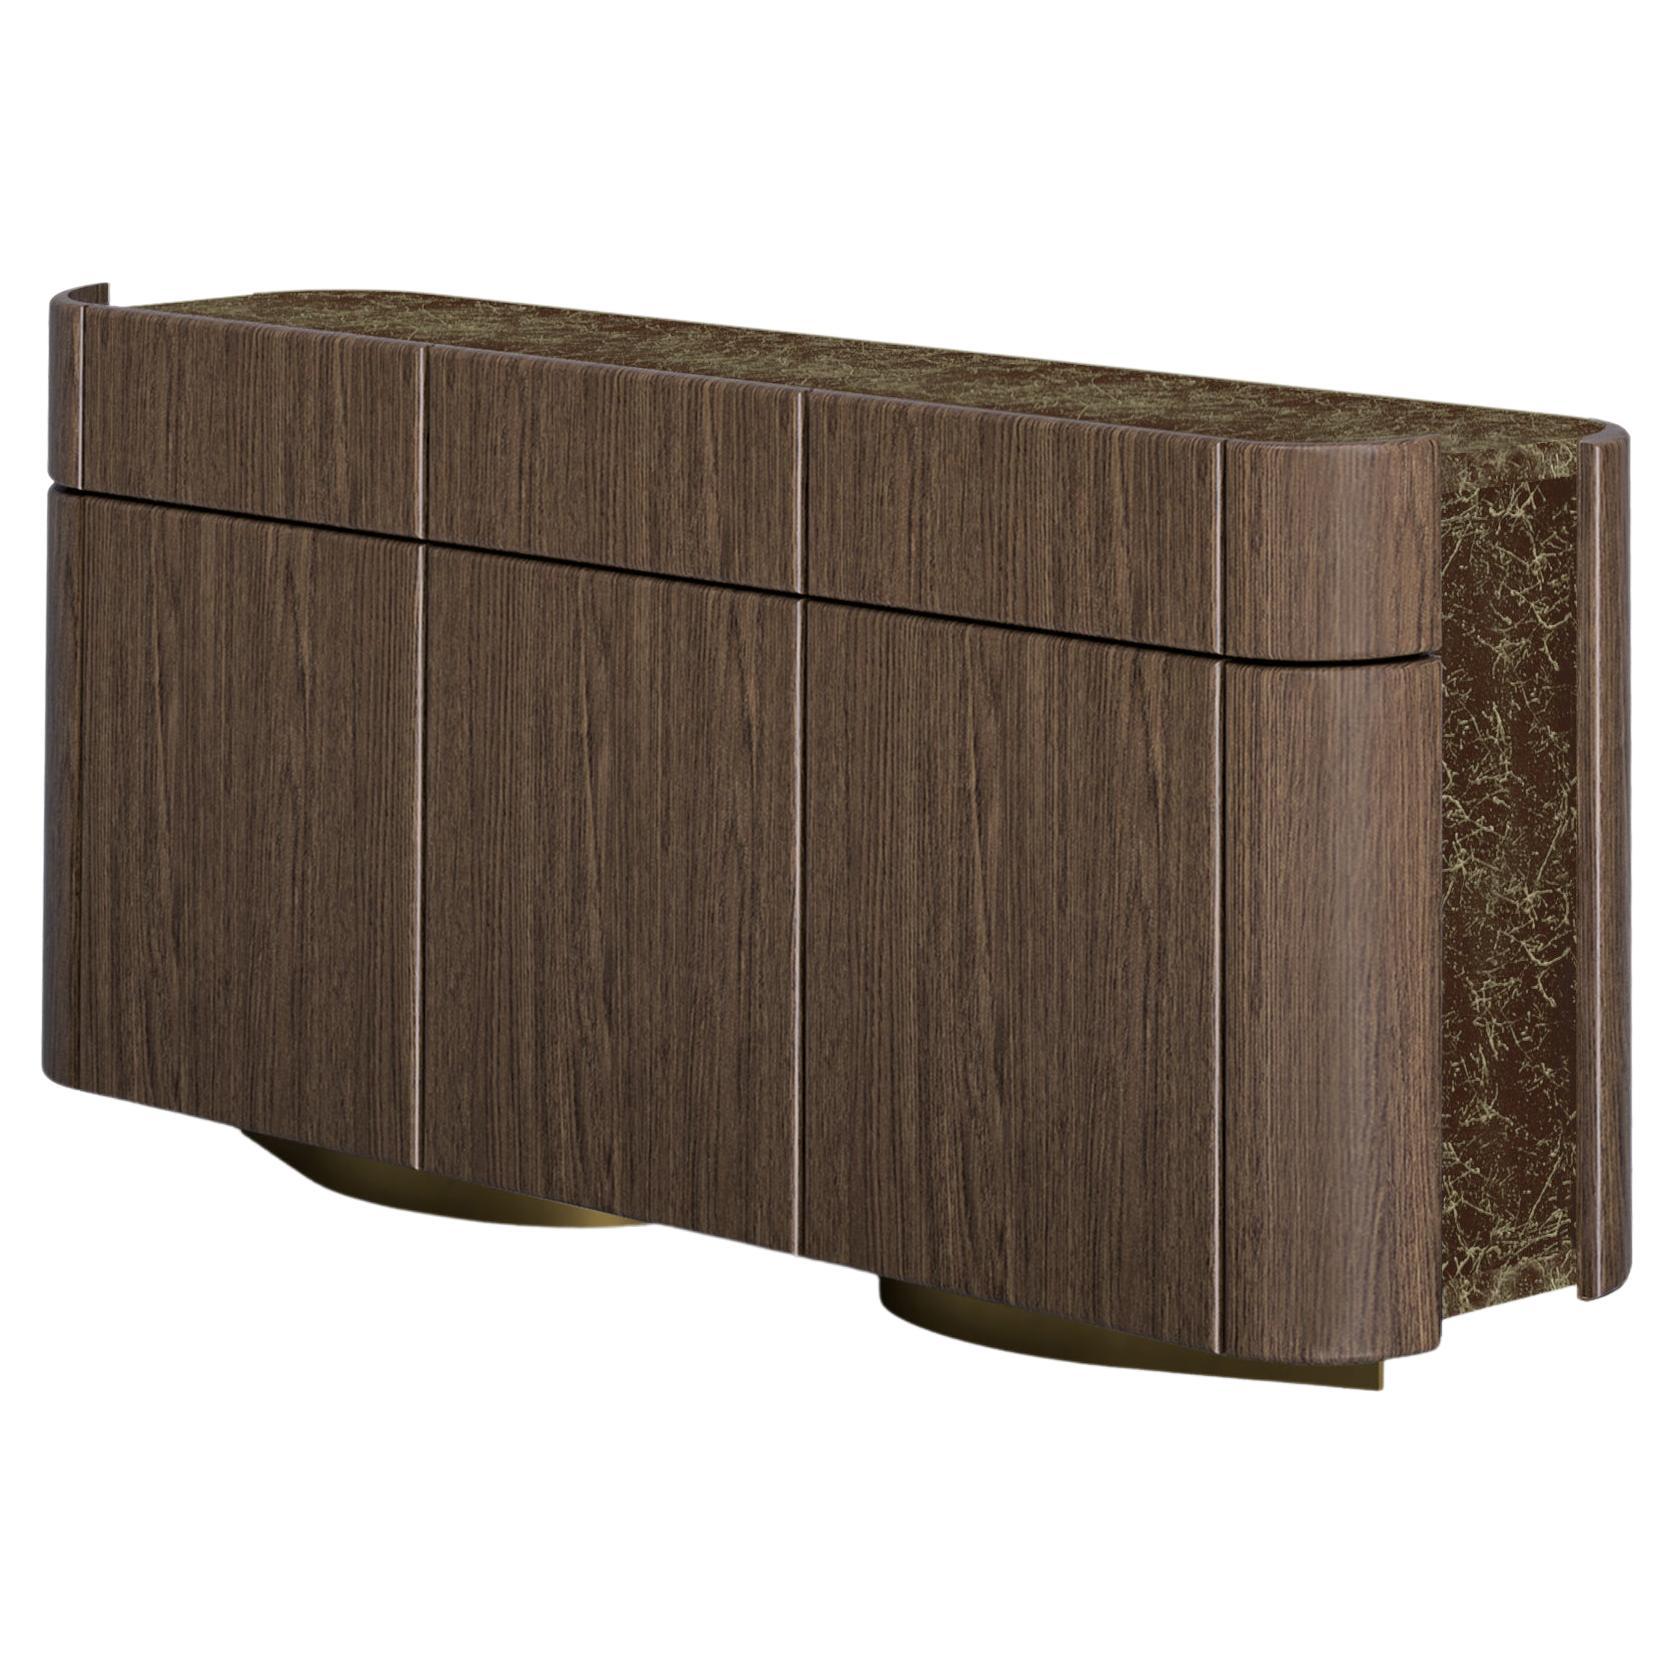 Modern Credenza, Oak Veneer Body, Textured Lacquered Wood Top and Sides